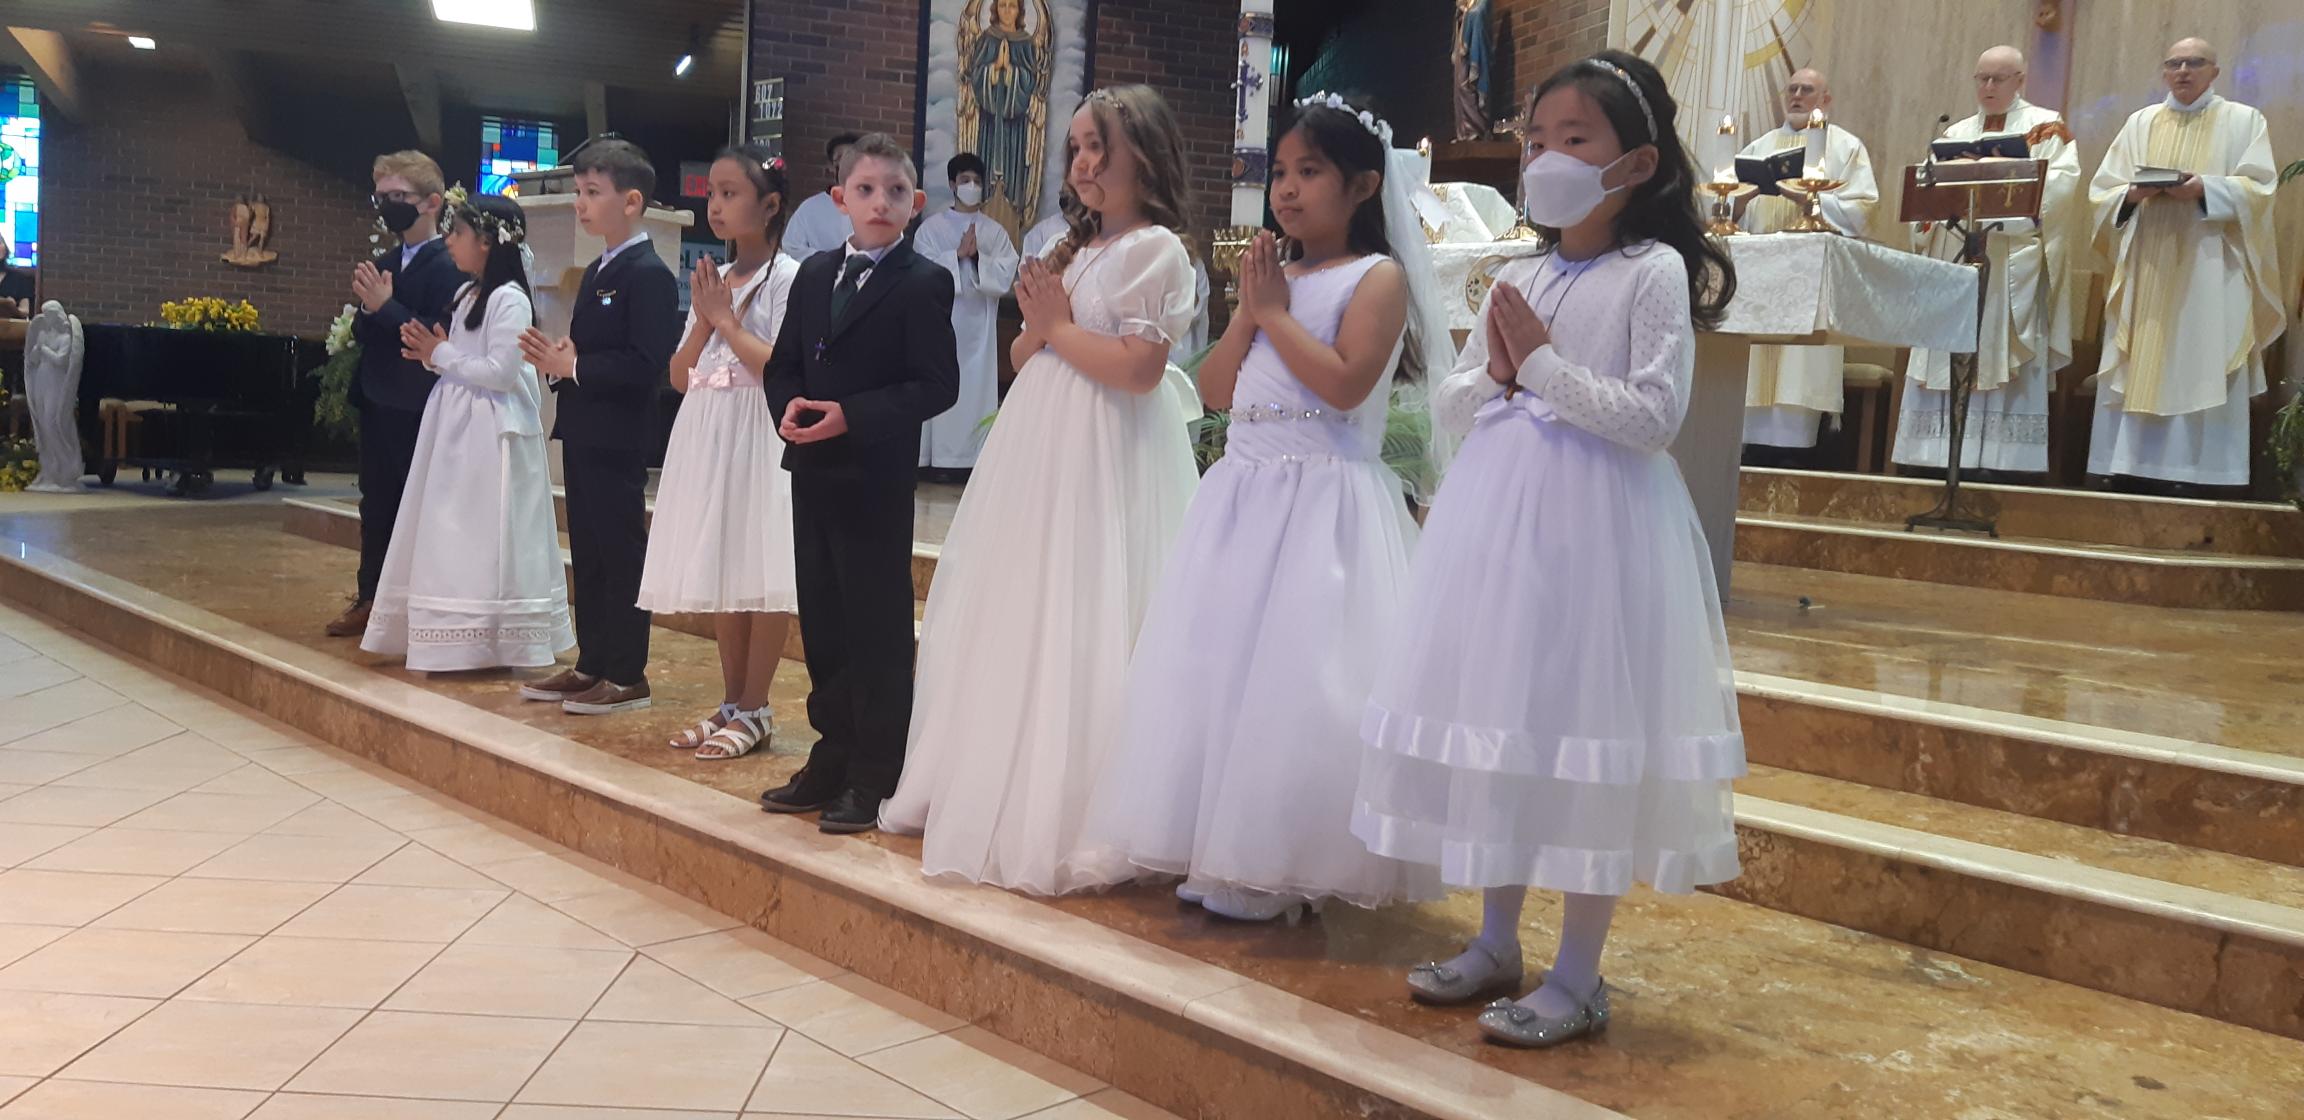 May 8 First Communion Candidates